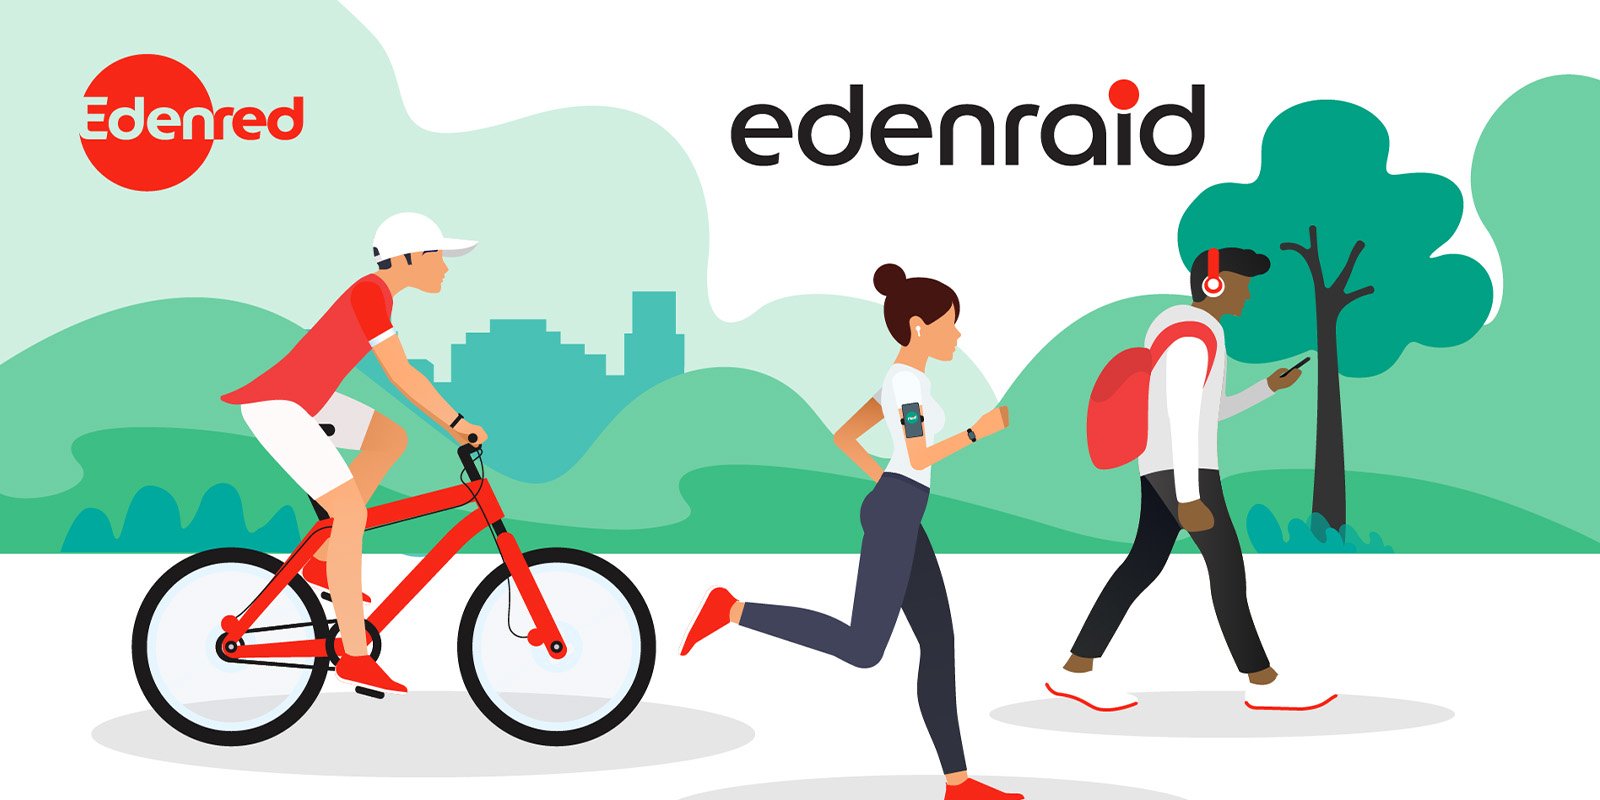 Edenraind 2022 icon with a woman running, a man walking and one person cycling.